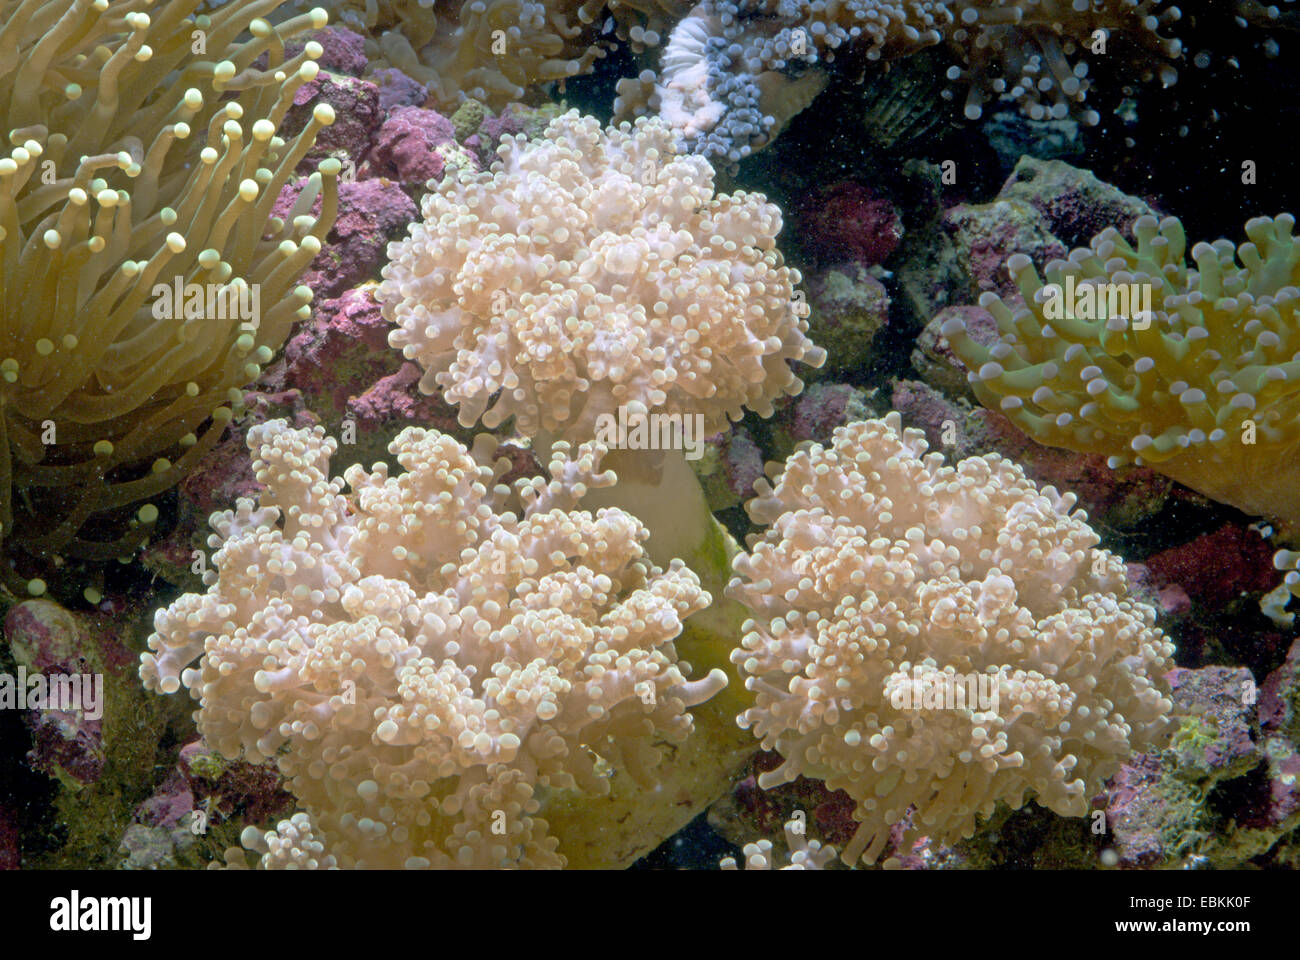 Corail Euphyllia yaeyamaensis (flamme), high angle view Banque D'Images